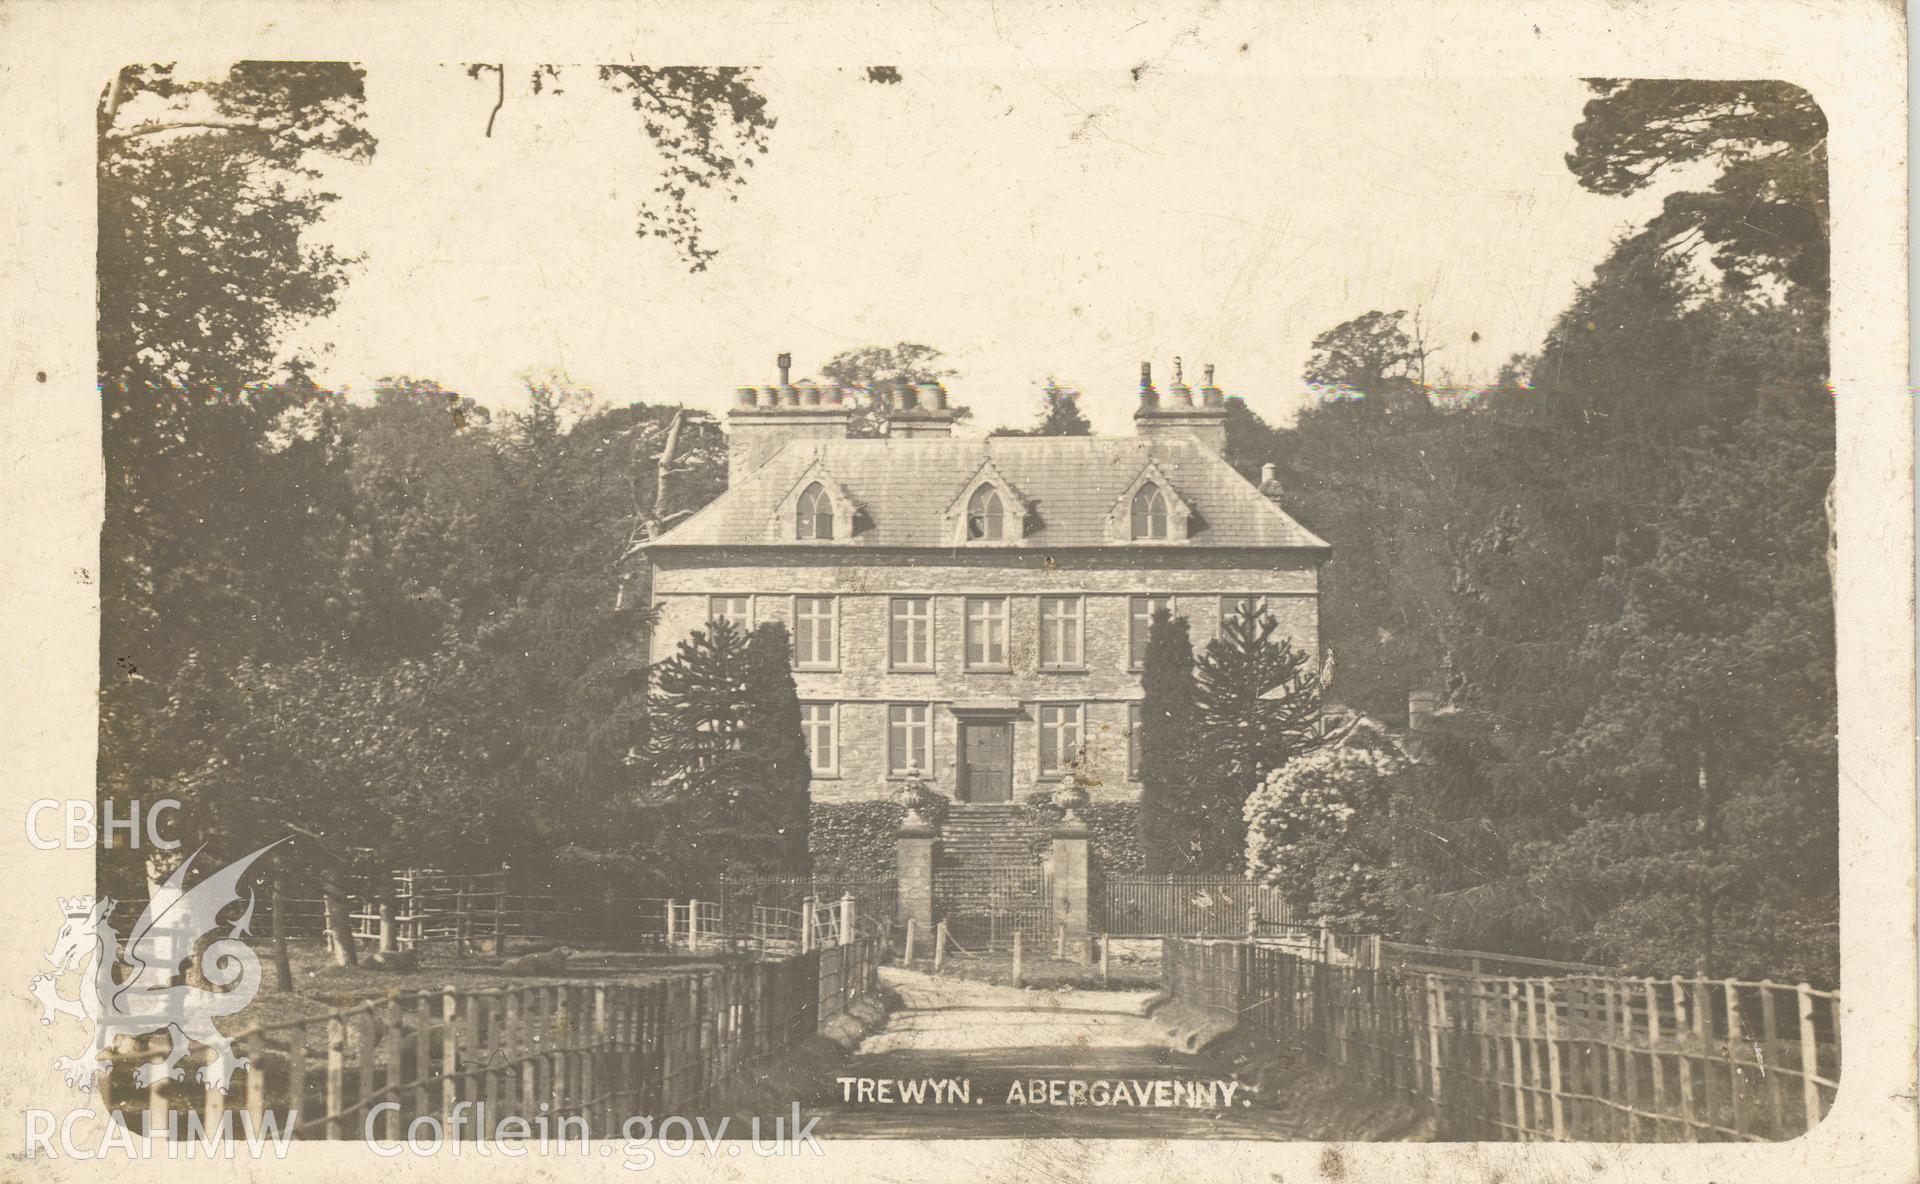 Digitised postcard image of Trewyn Manor, Crucorney. Produced by Parks and Gardens Data Services, from an original item in the Peter Davis Collection at Parks and Gardens UK. We hold only web-resolution images of this collection, suitable for viewing on screen and for research purposes only. We do not hold the original images, or publication quality scans.